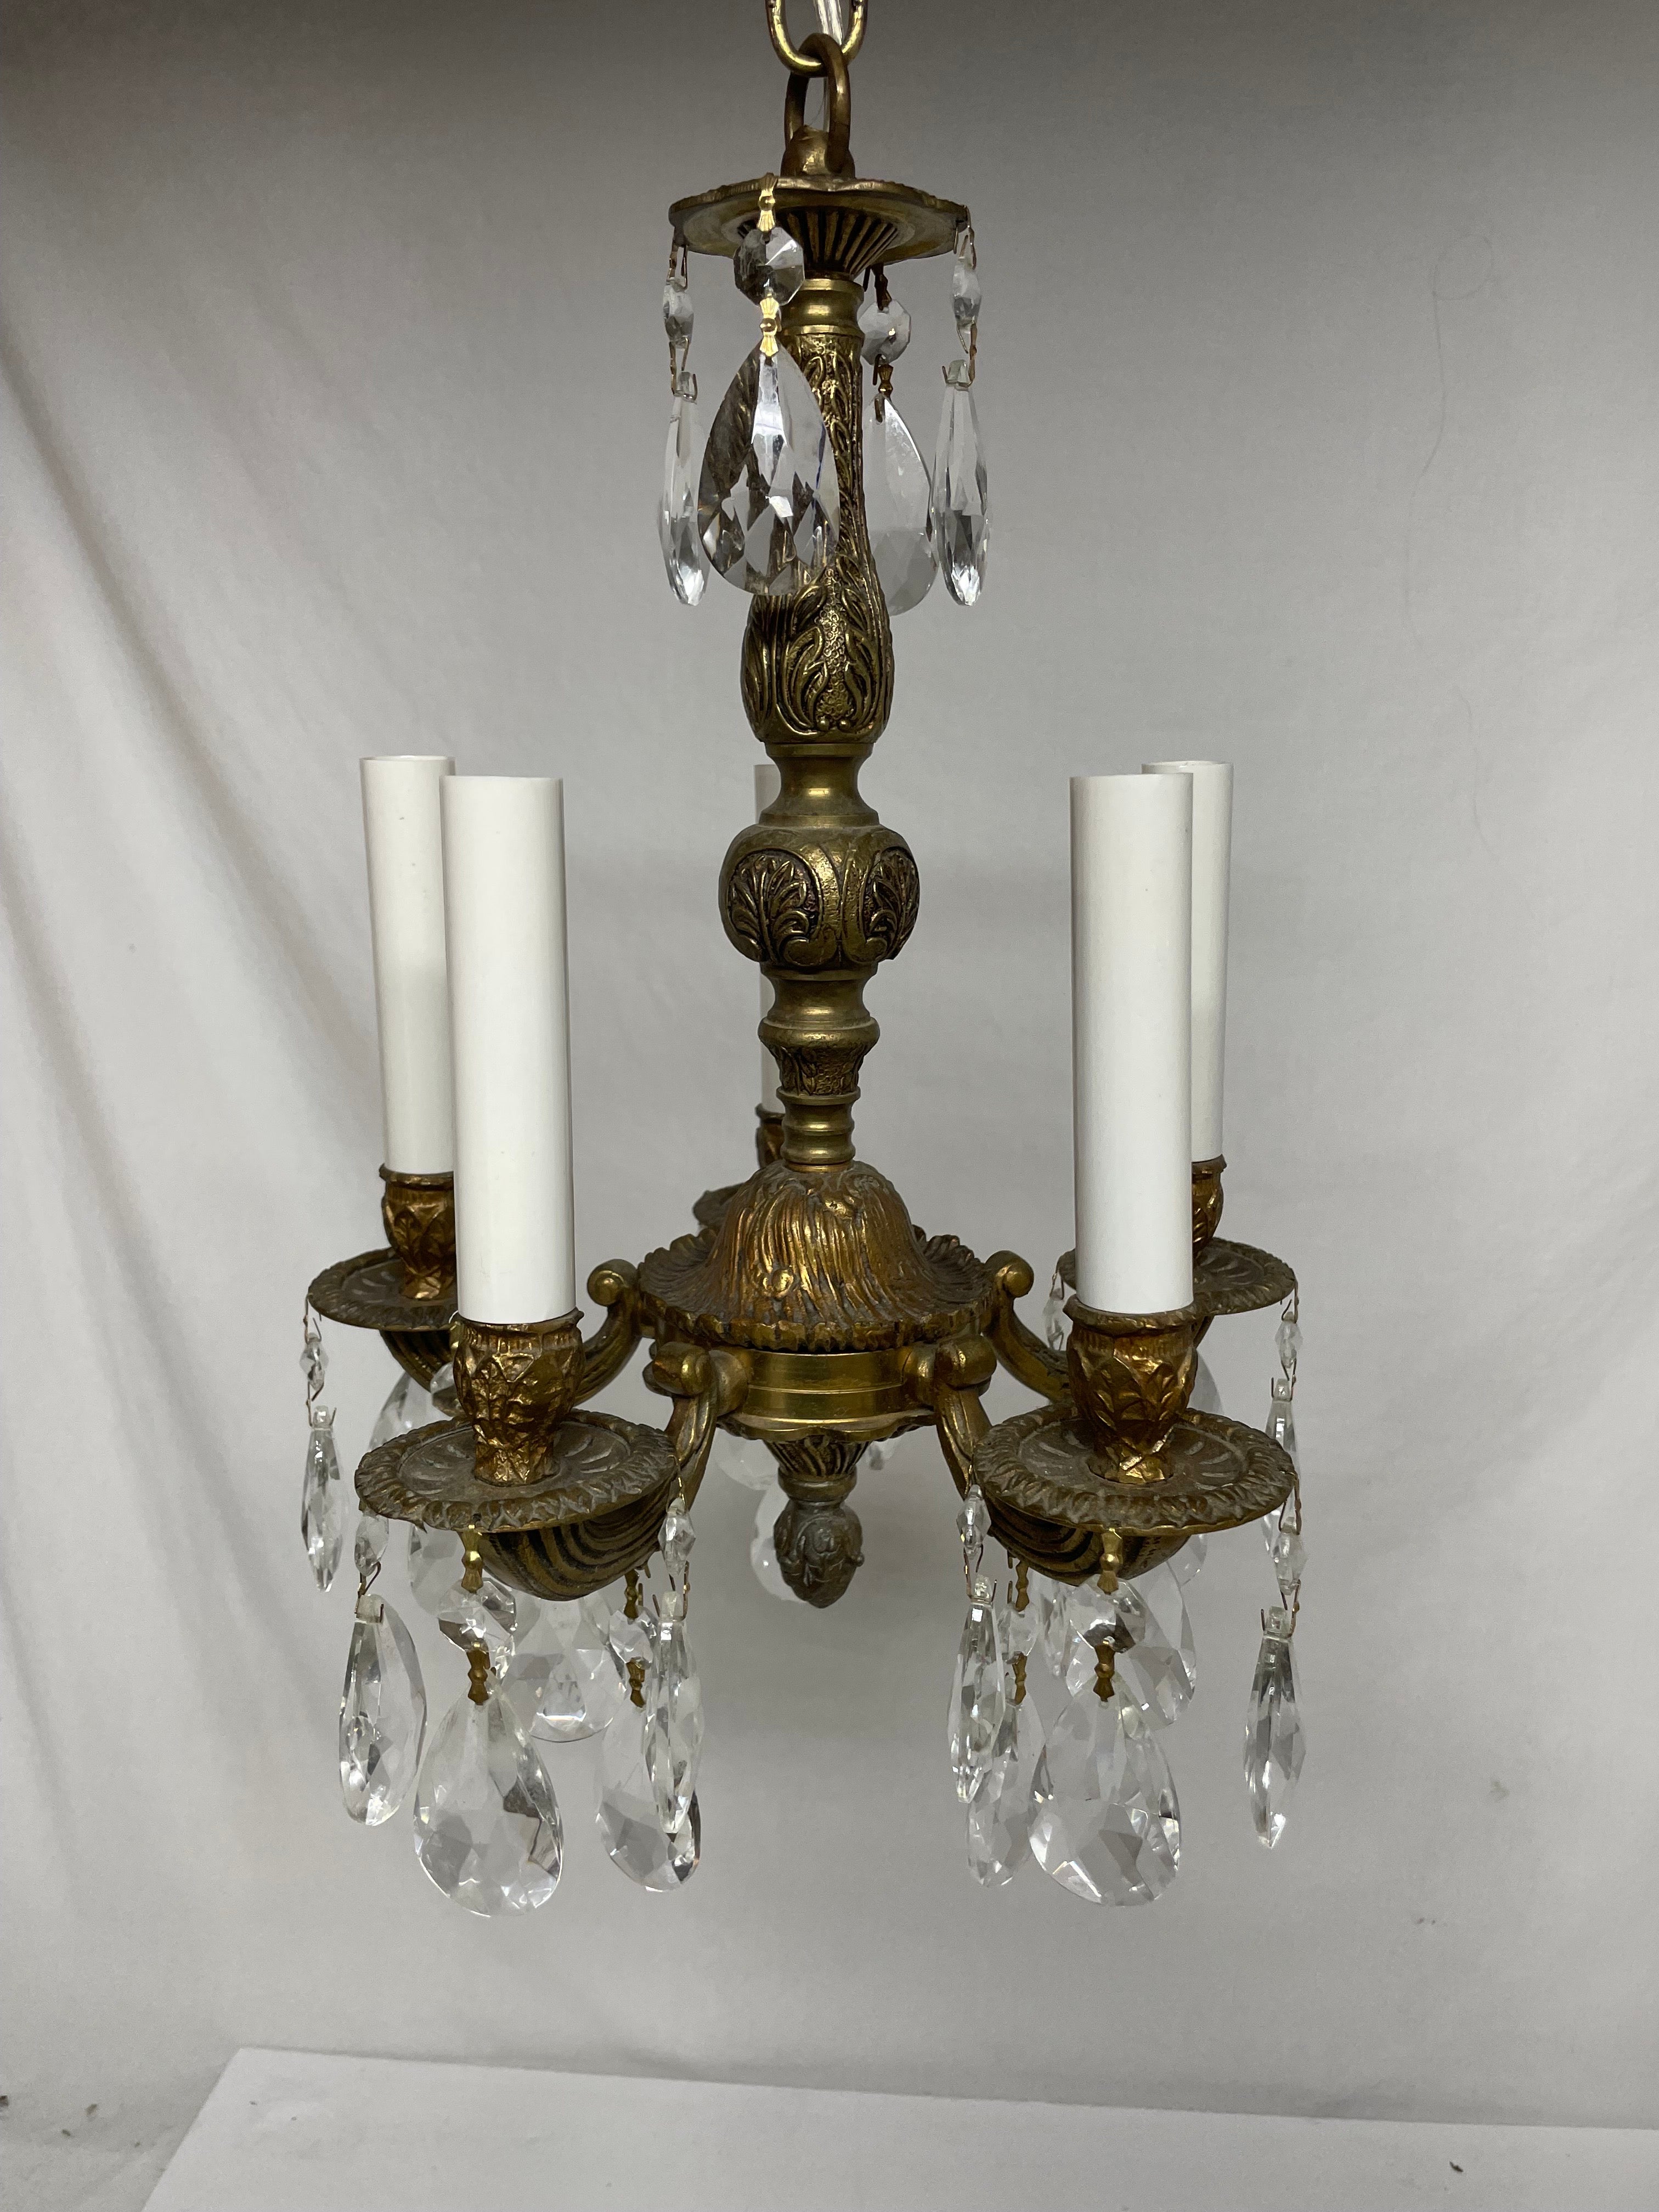 Brass and Crystal French Style Chandelier featuring shimmering crystals mounted on a detailed brass frame. Rewired with clear wire. Five arms with candelabra sockets. Chandelier measures 10